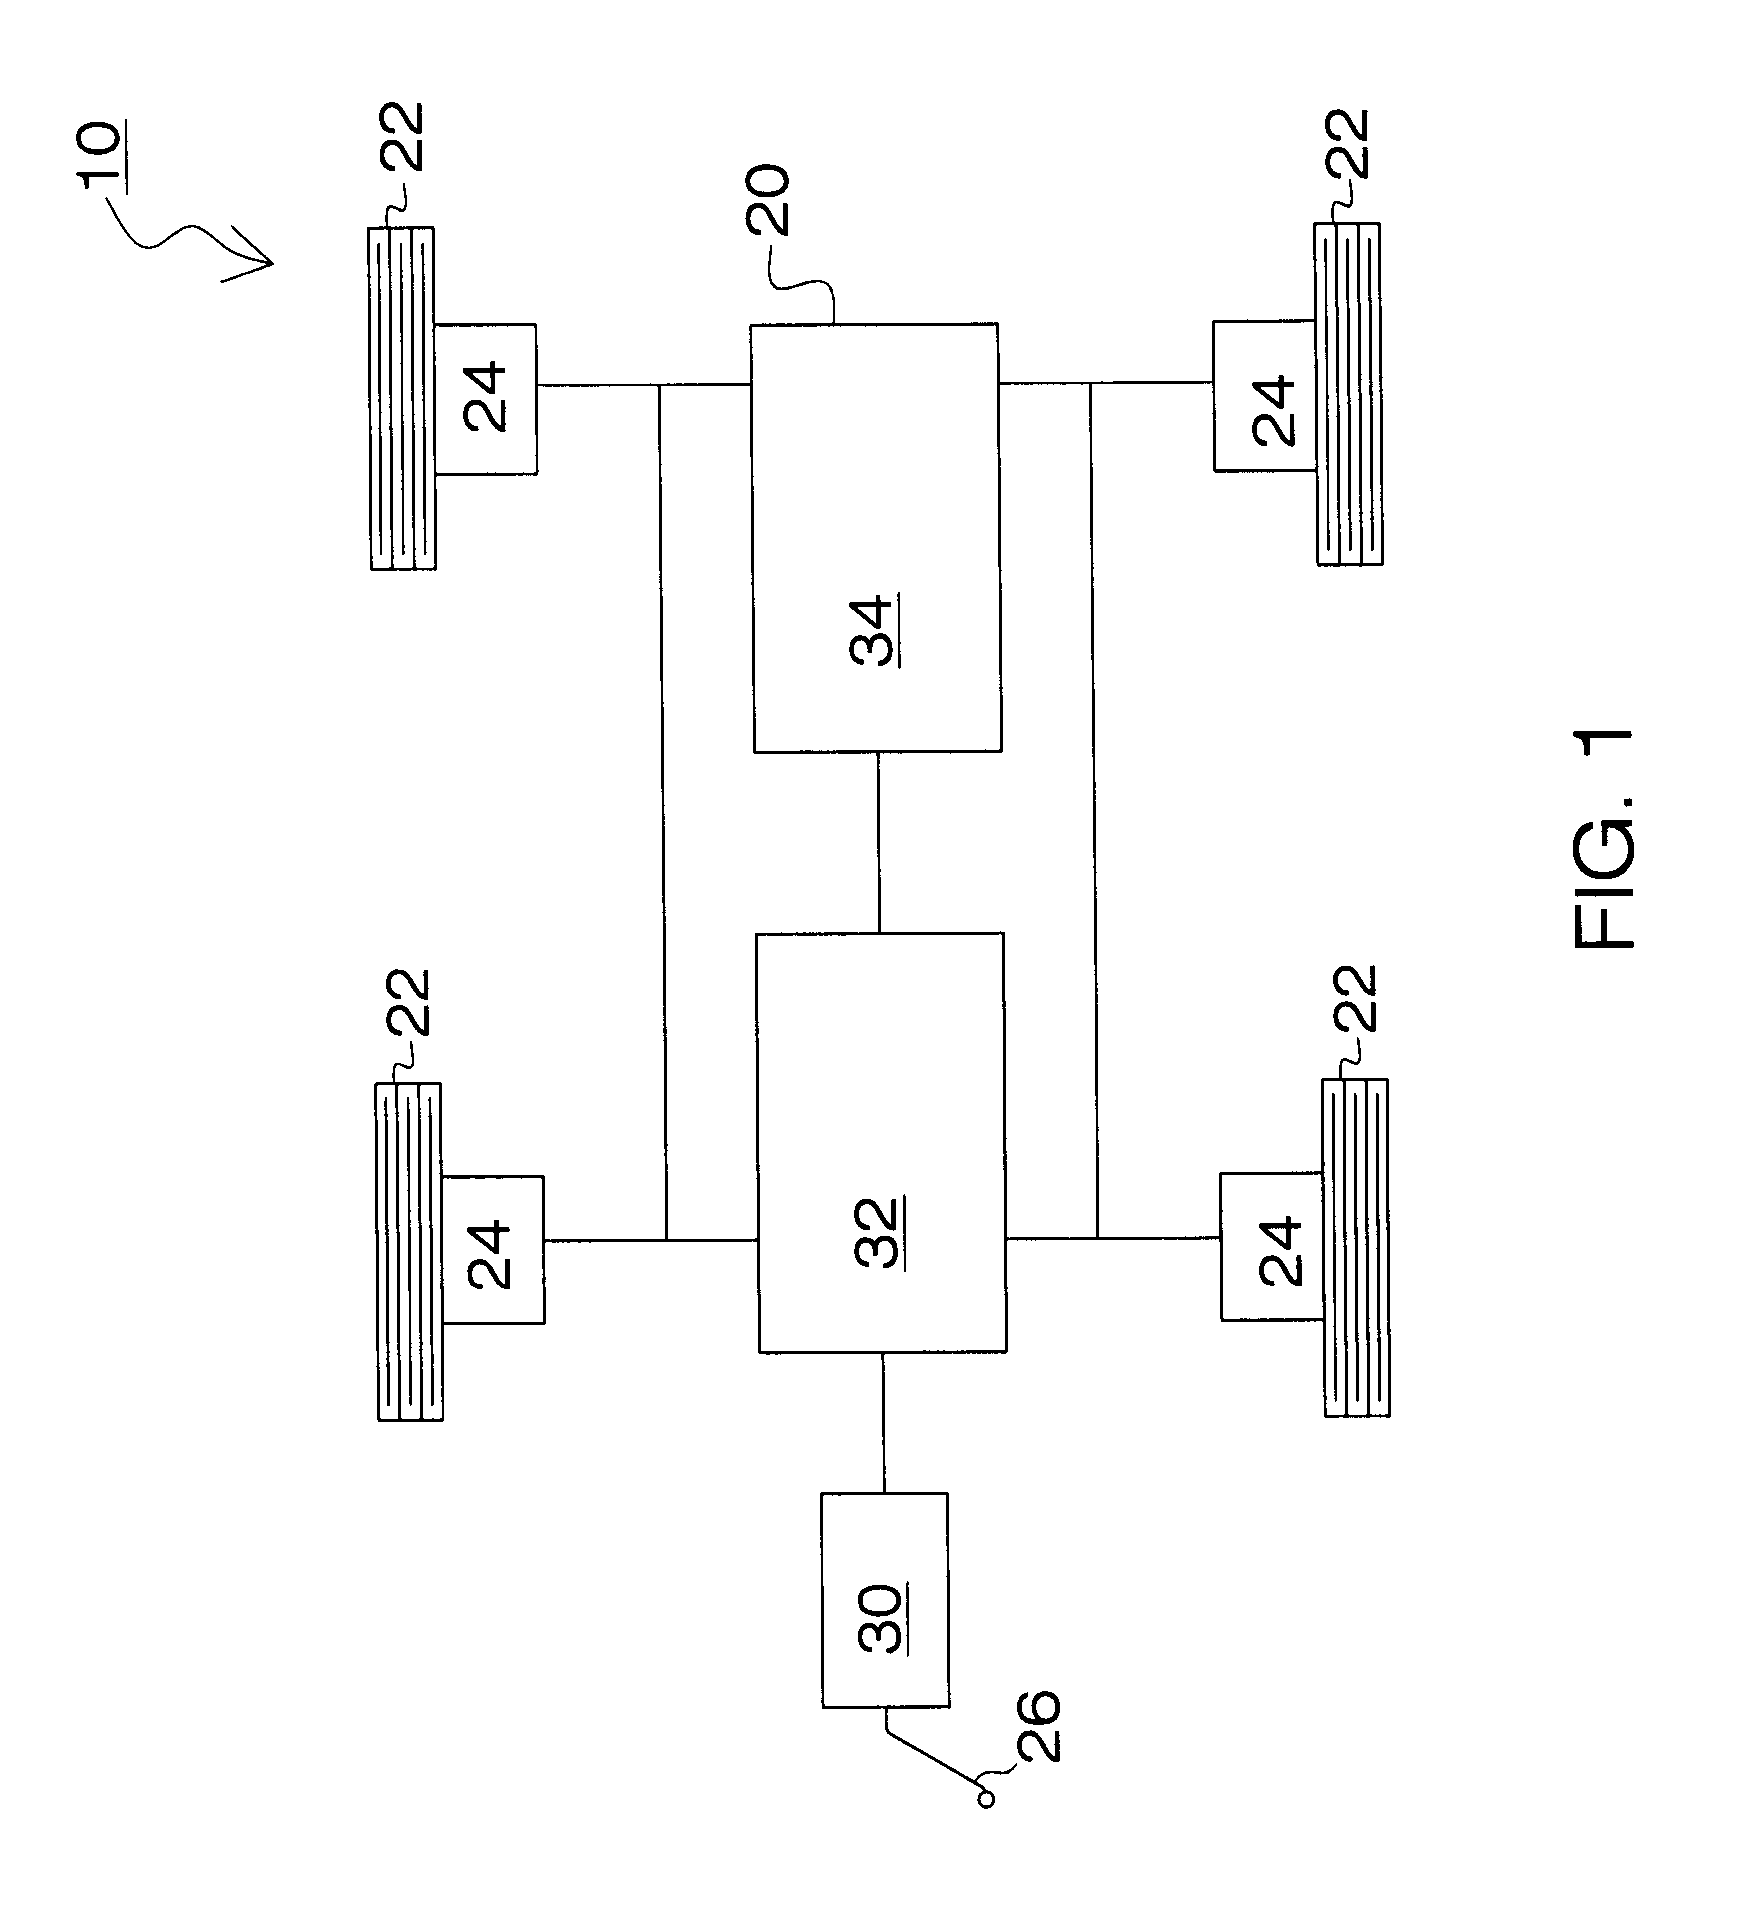 Method and Apparatus for Charging Electric Devices